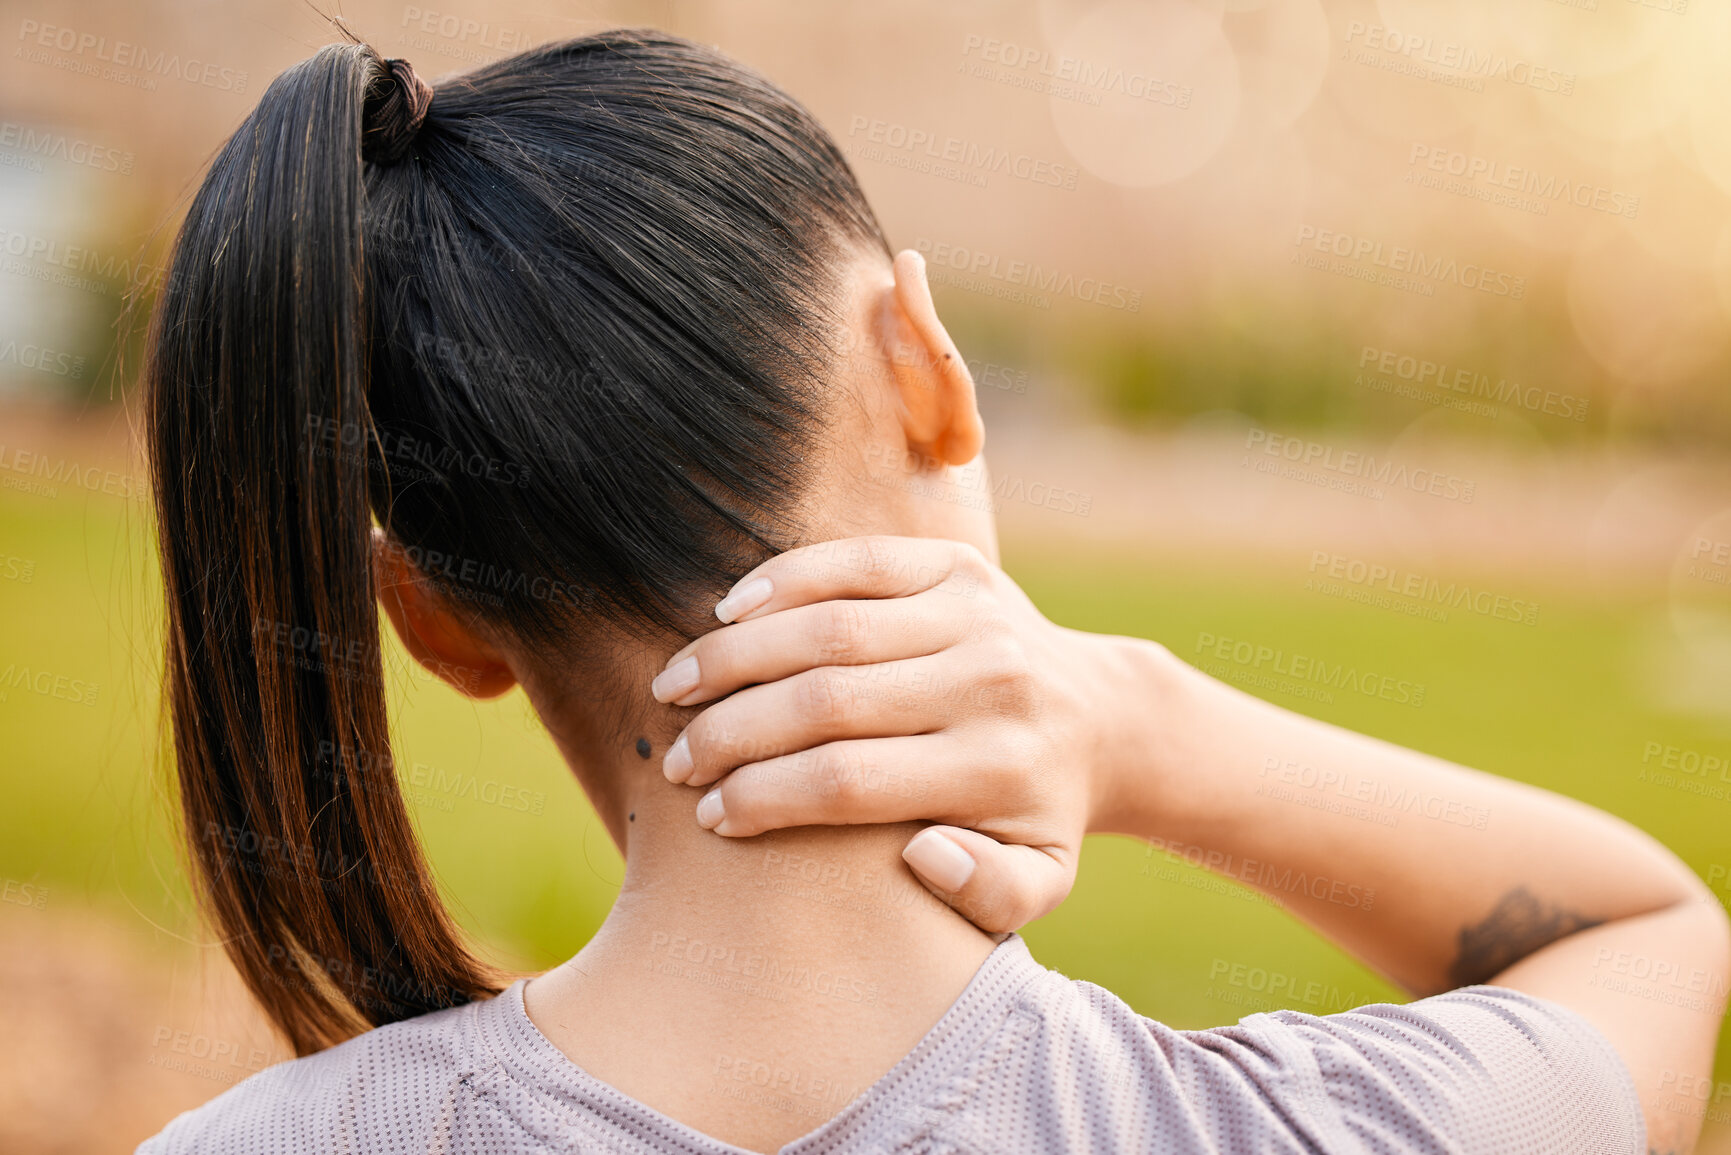 Buy stock photo Neck pain, hands and back injury in nature after accident, running or workout outdoors. Sports, health and woman athlete with fibromyalgia, inflammation or tendinitis, arthritis or painful muscles.